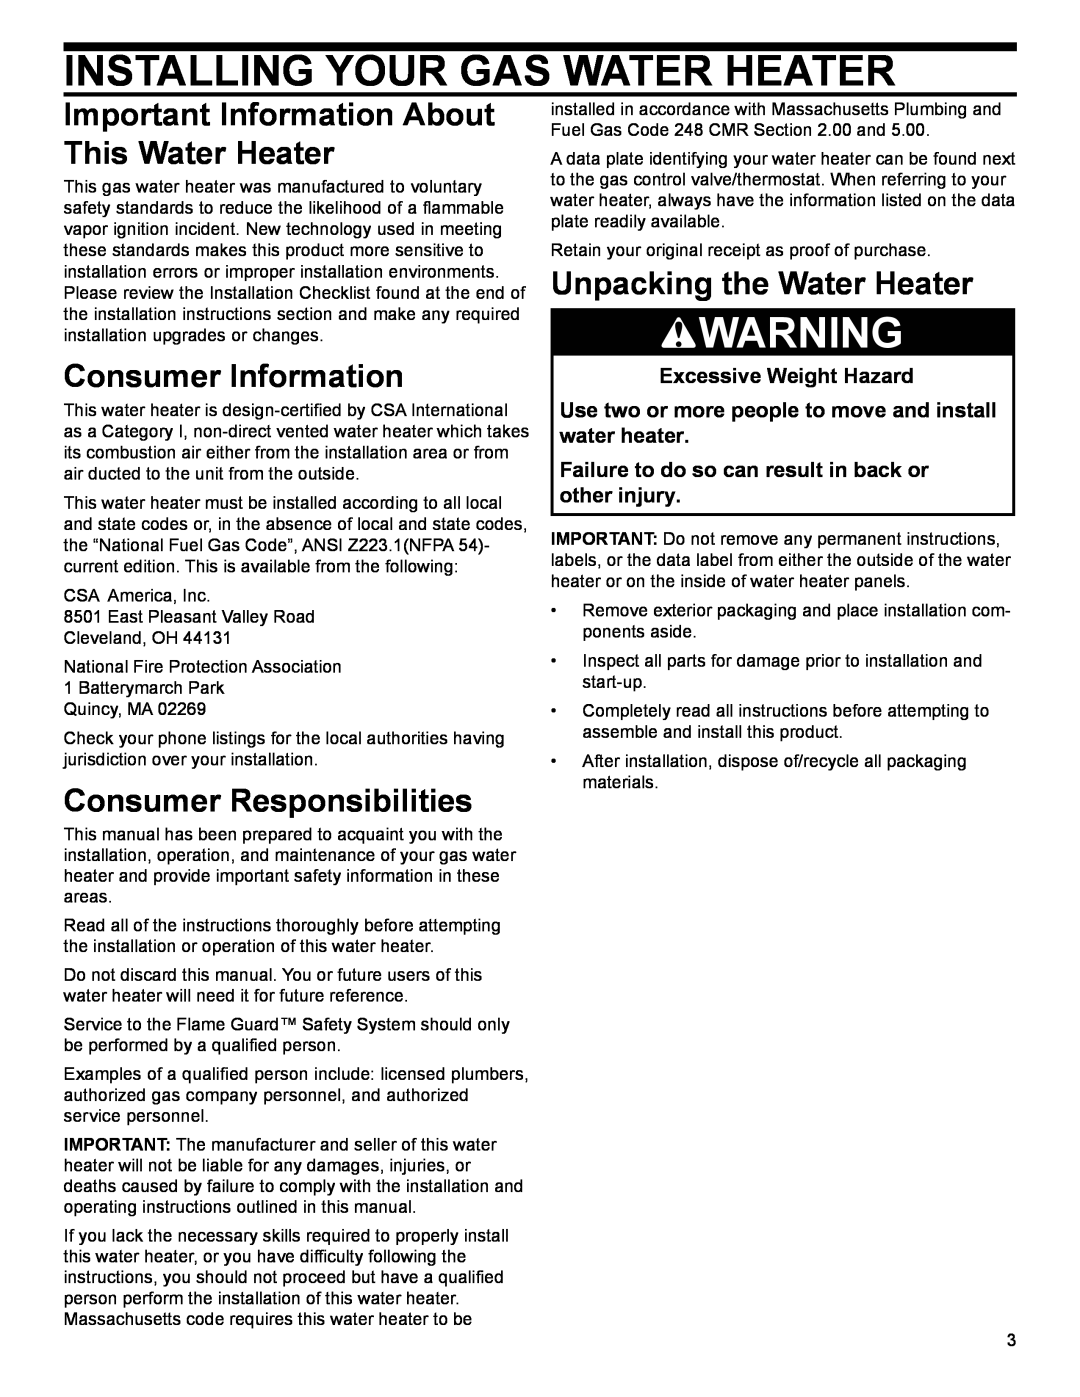 American Water Heater 318935-003 Installing Your Gas Water Heater, Important Information About This Water Heater 